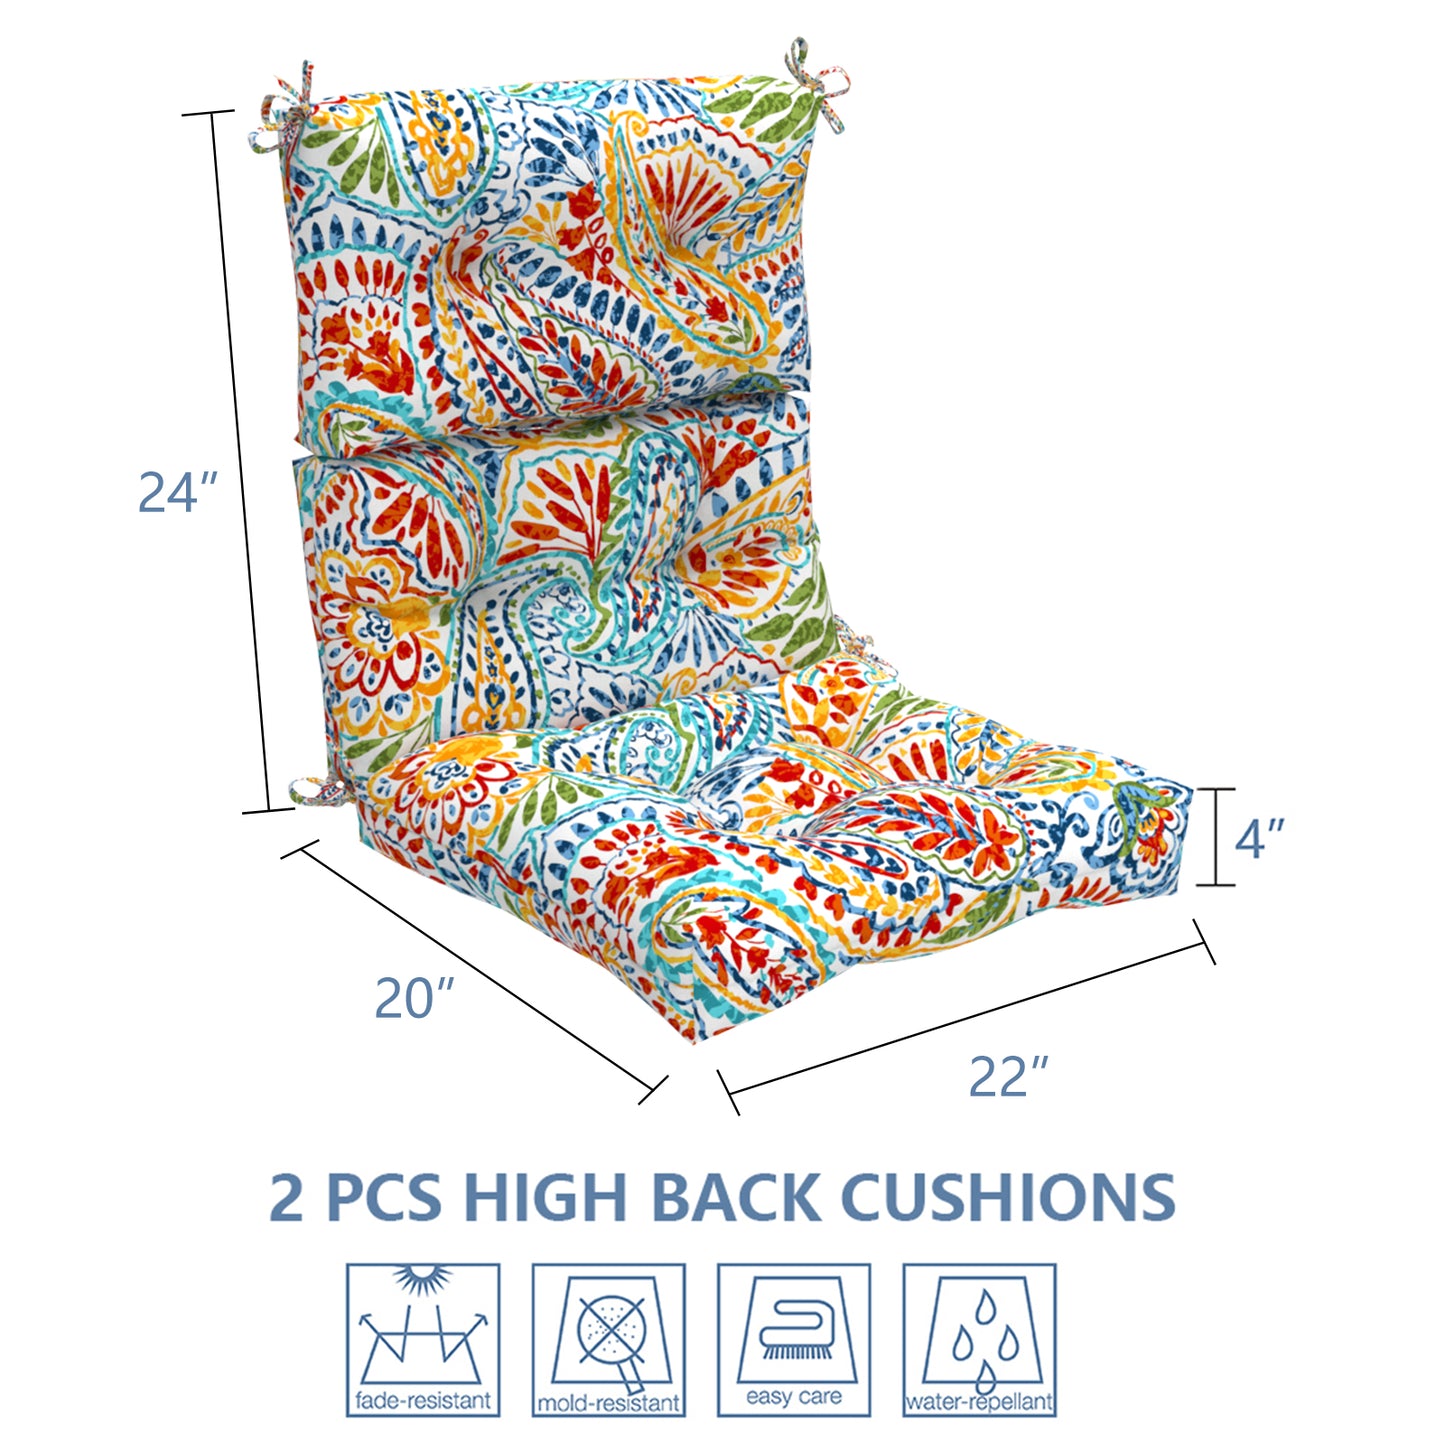 Melody Elephant Outdoor Tufted High Back Chair Cushions, Water Resistant Rocking Seat Chair Cushions 2 Pack, Adirondack Cushions for Patio Home Garden, 22" W x 20" D, Paisley Multi